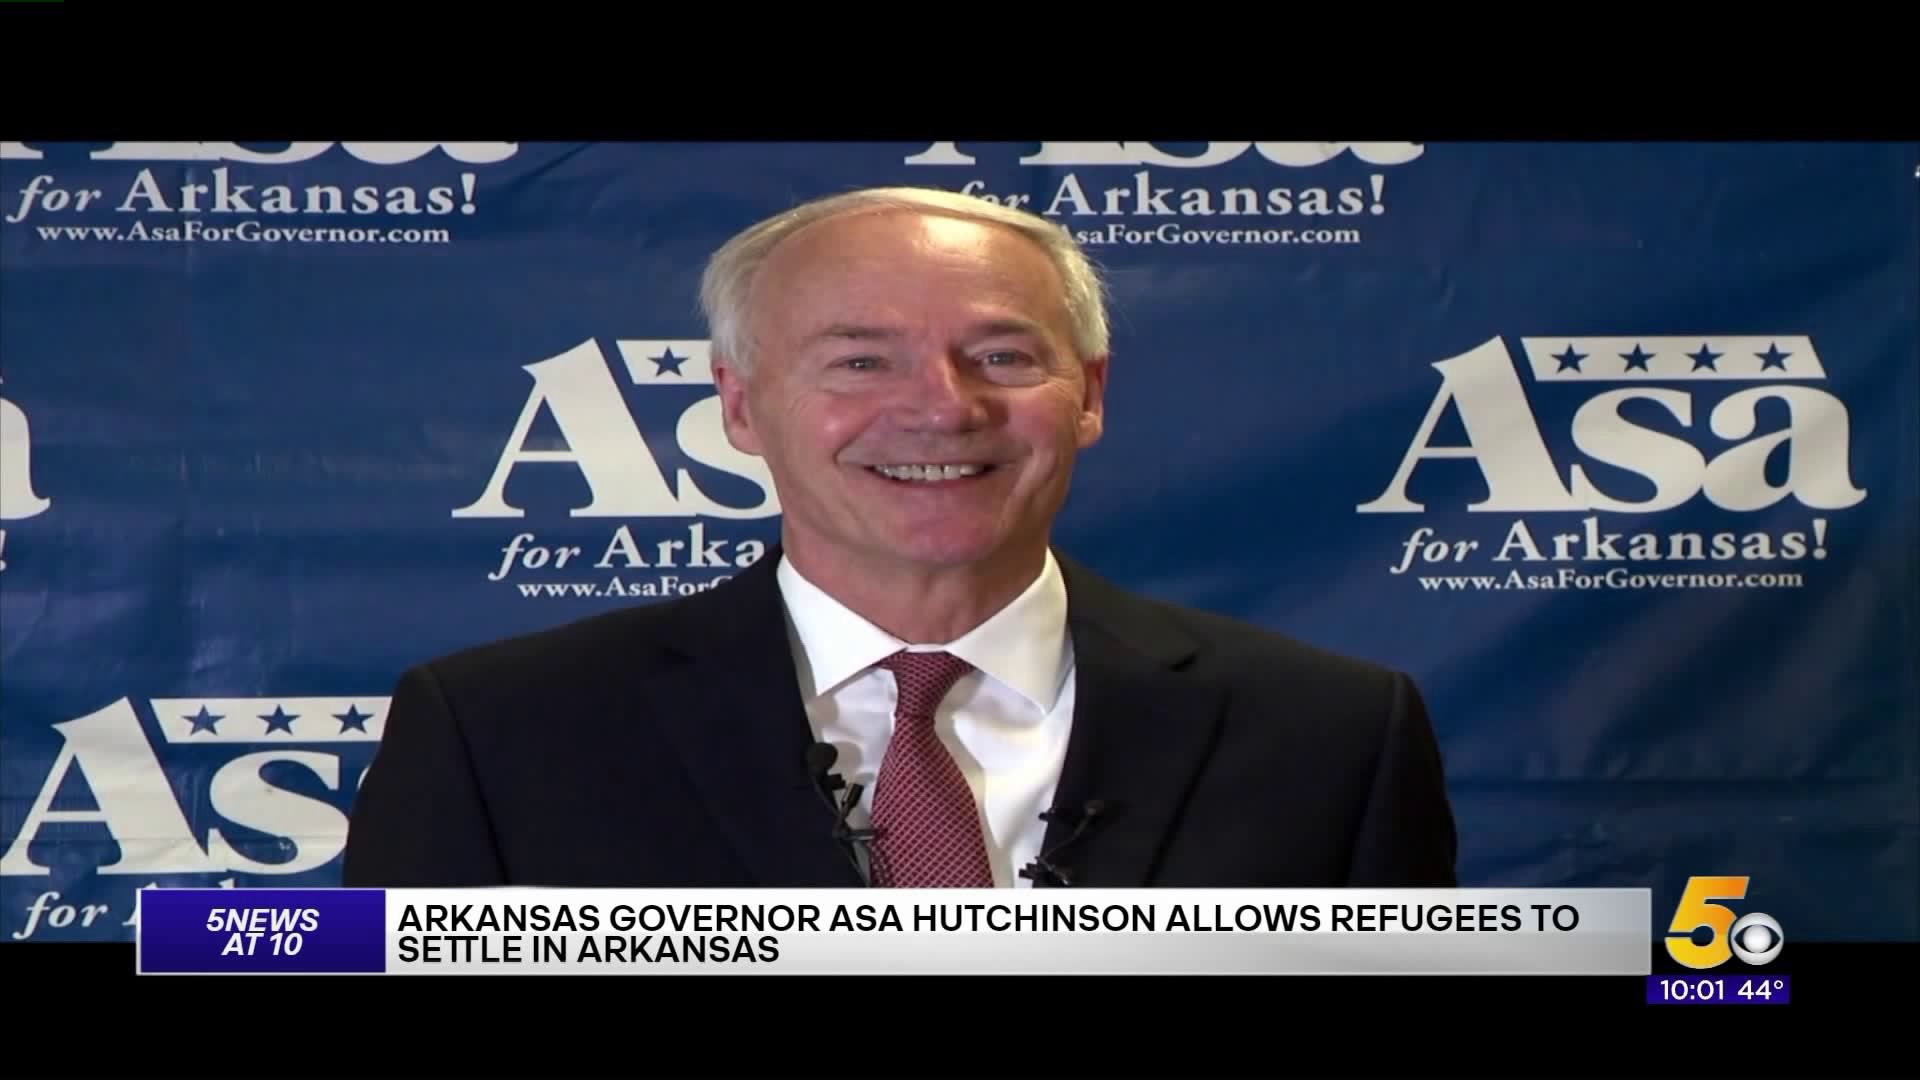 Arkansas Governor Allows Refugees To Settle In AR